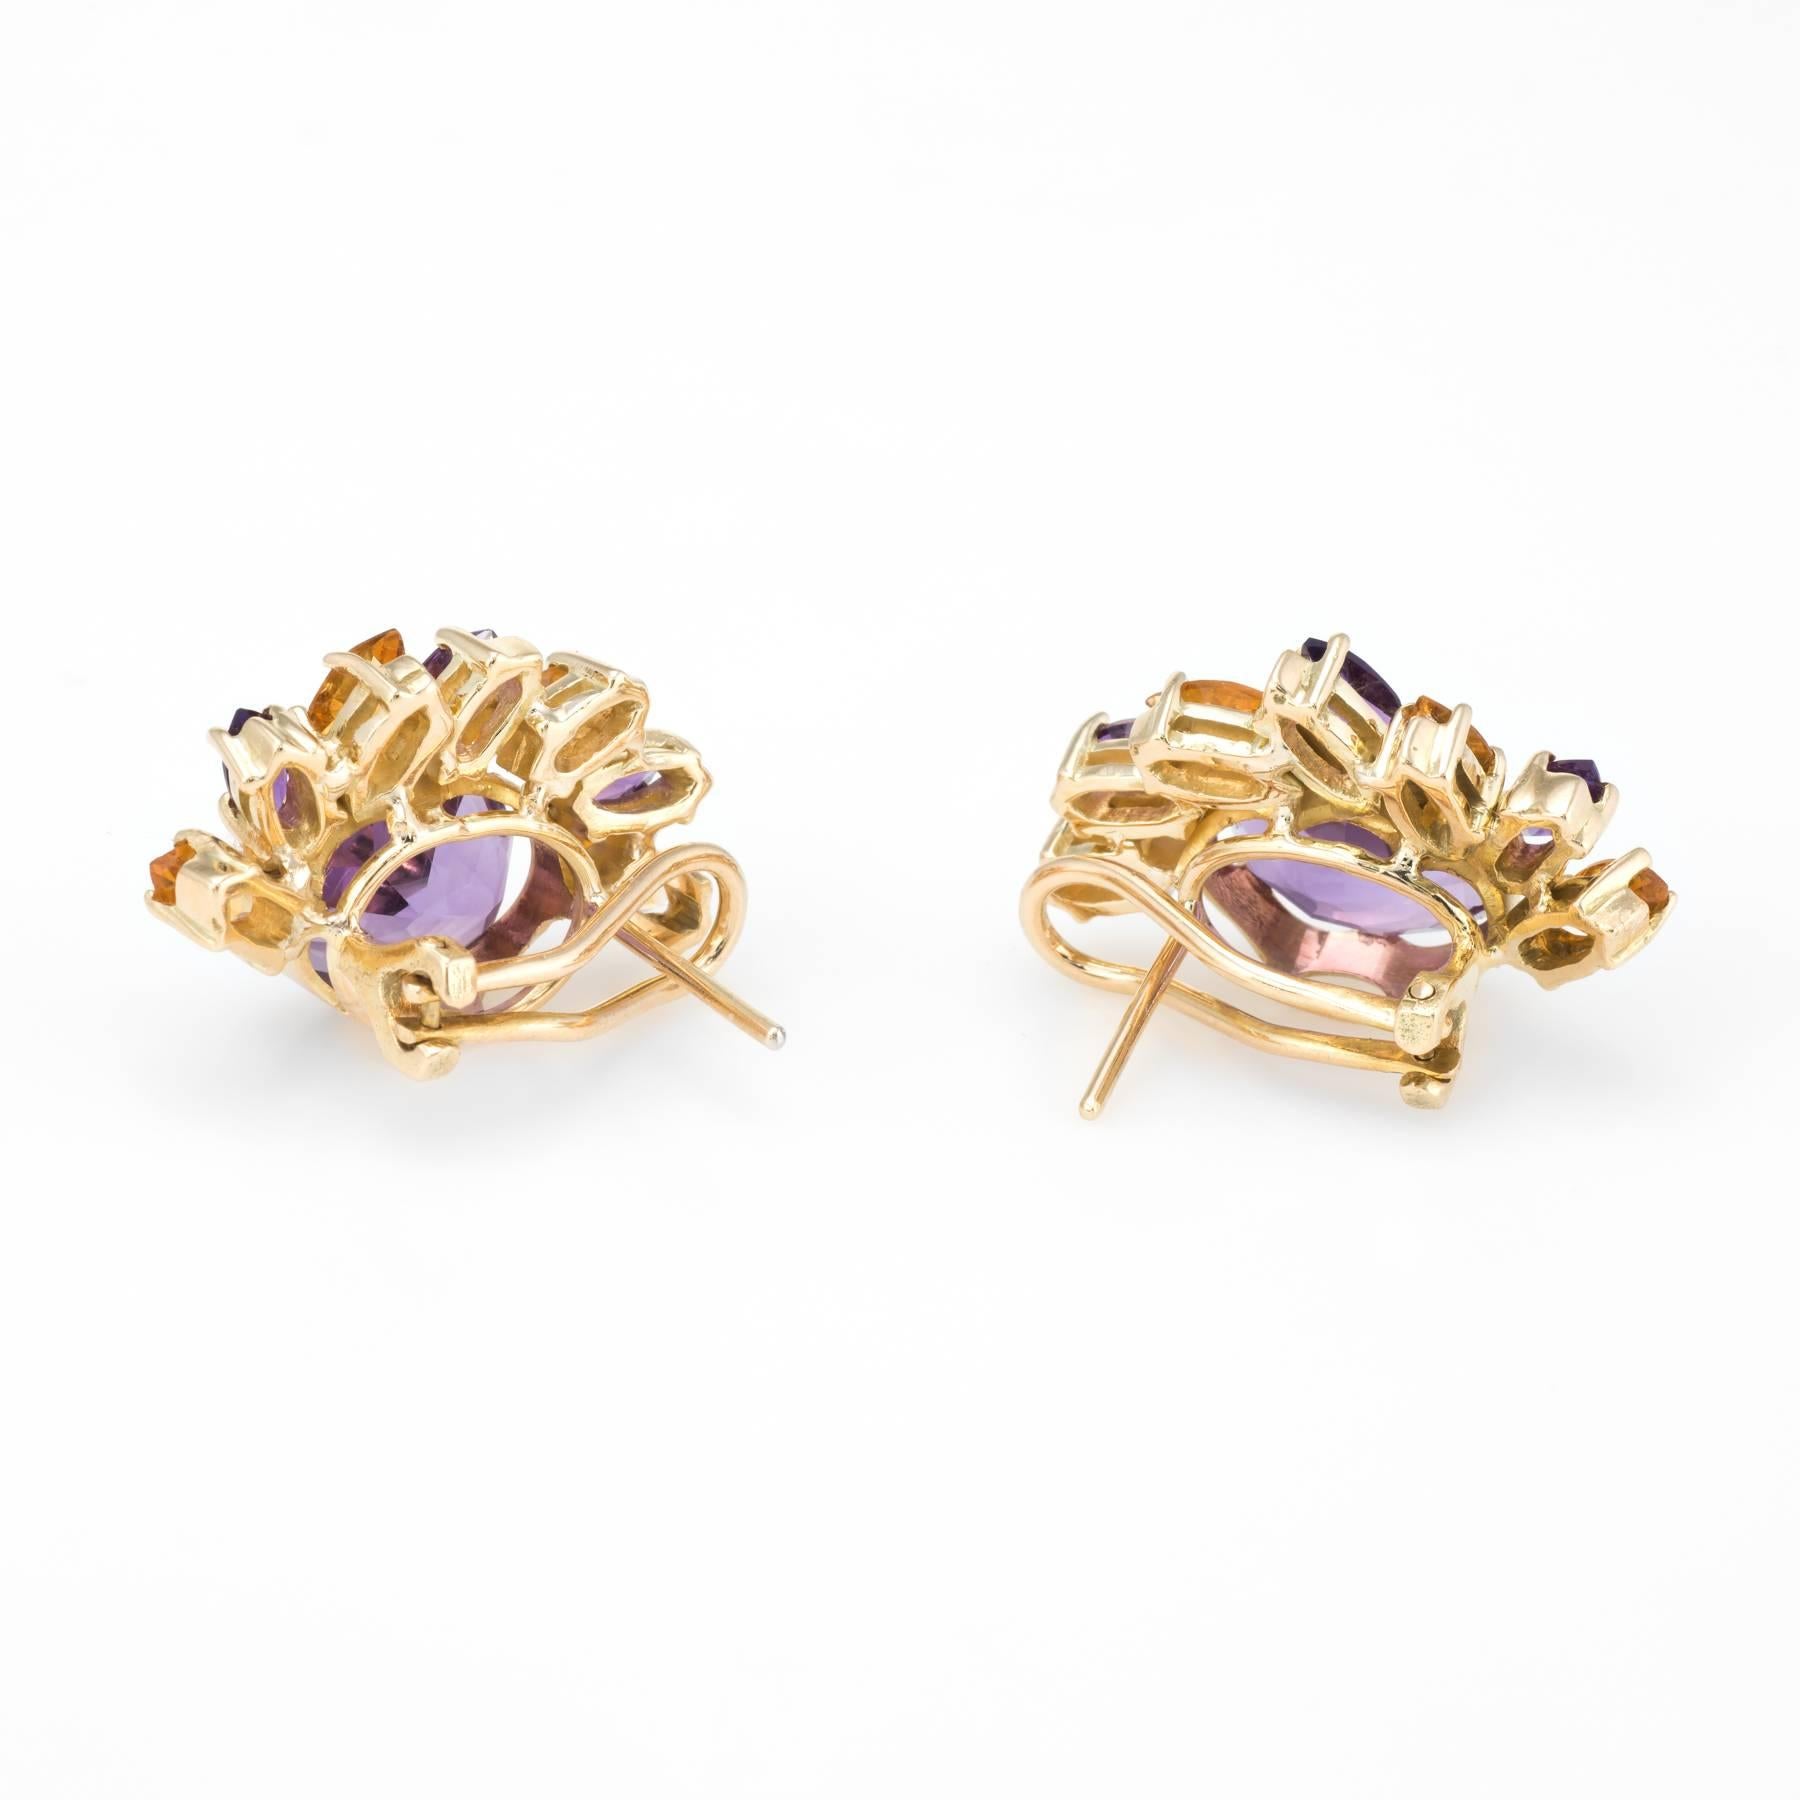 Stylish pair of amethyst & citrine half moon earrings, crafted in 14k yellow gold. 

Oval faceted amethyst measures 12mm x 10mm (estimated at 4.50 carats each - 9 carats total estimated weight), accented with 6 x 5mm x 2.75mm marquise cut amethyst